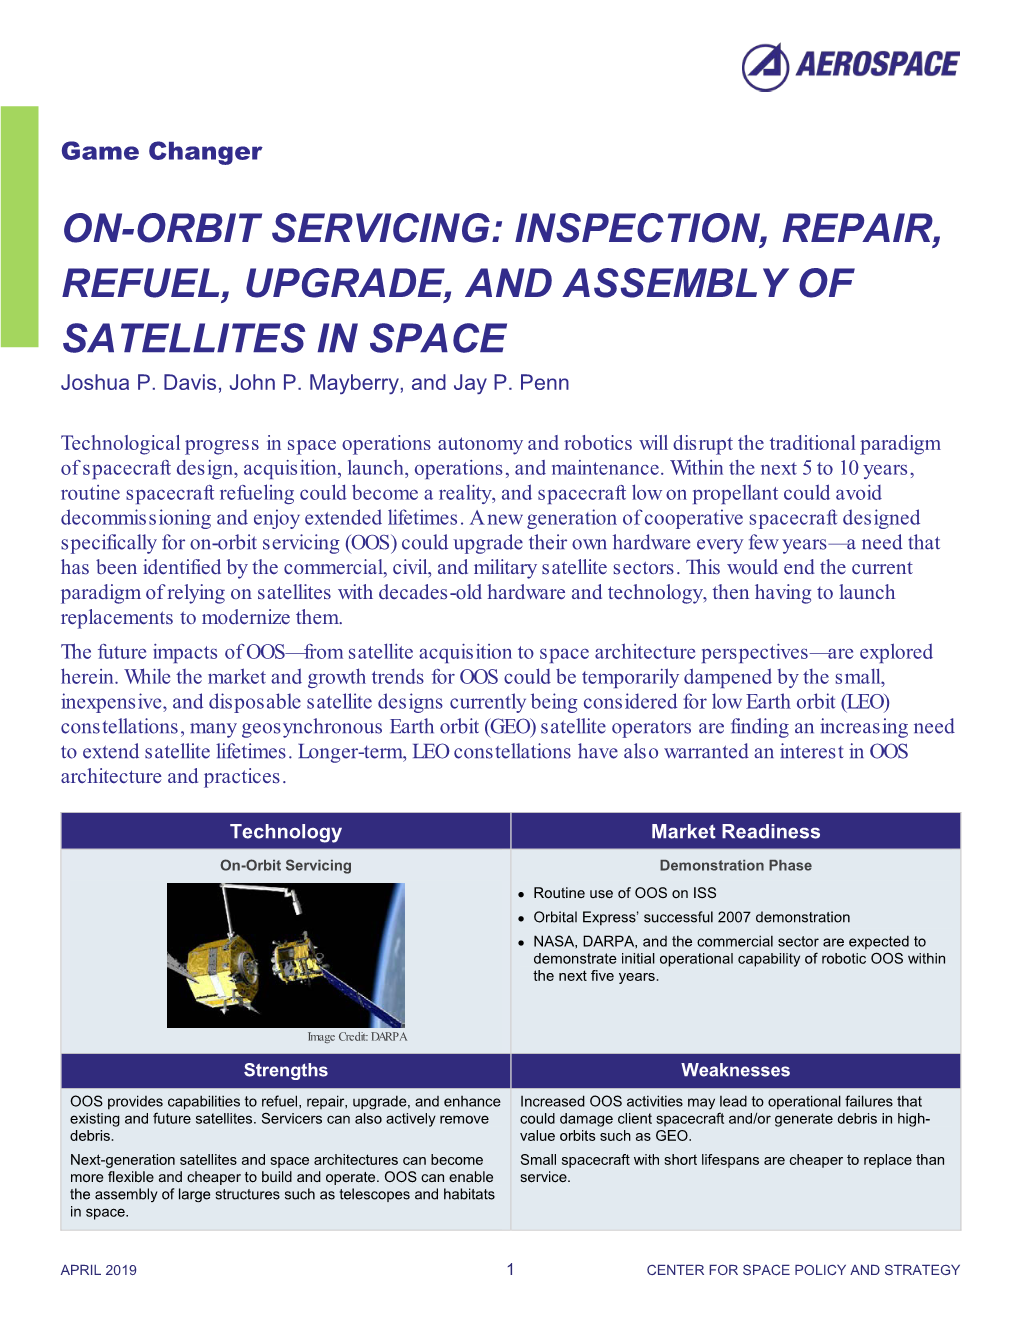 ON-ORBIT SERVICING: INSPECTION, REPAIR, REFUEL, UPGRADE, and ASSEMBLY of SATELLITES in SPACE Joshua P